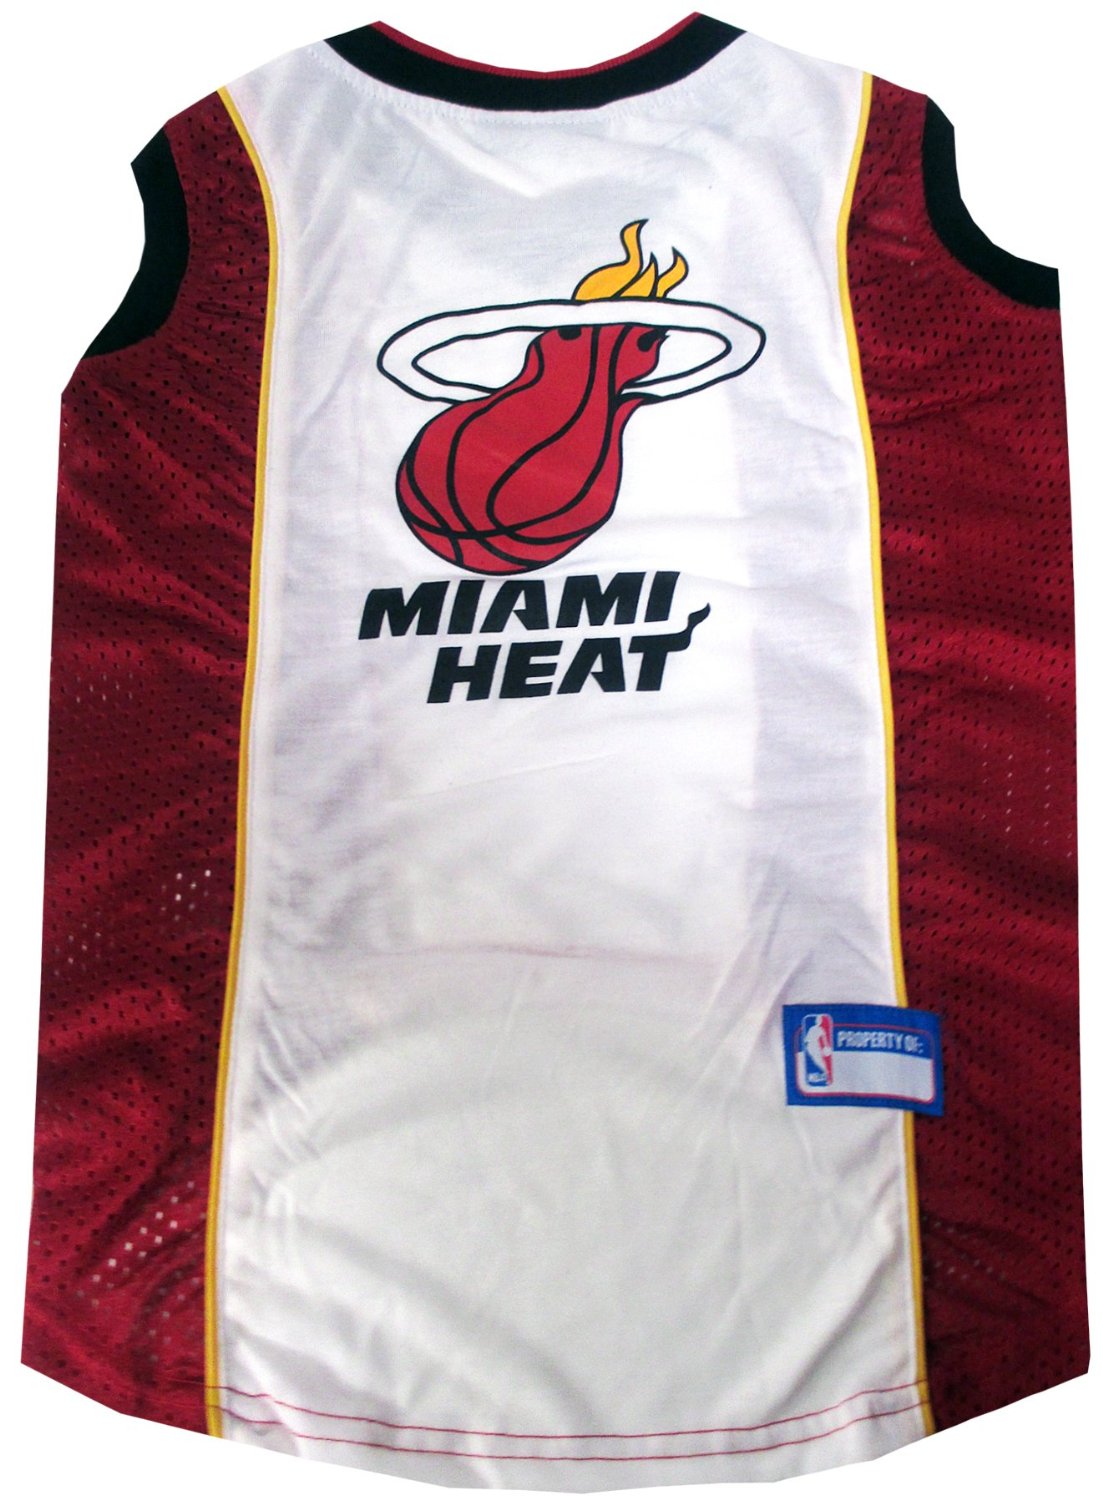 Pets First Co. Miami Heat Pet Jersey